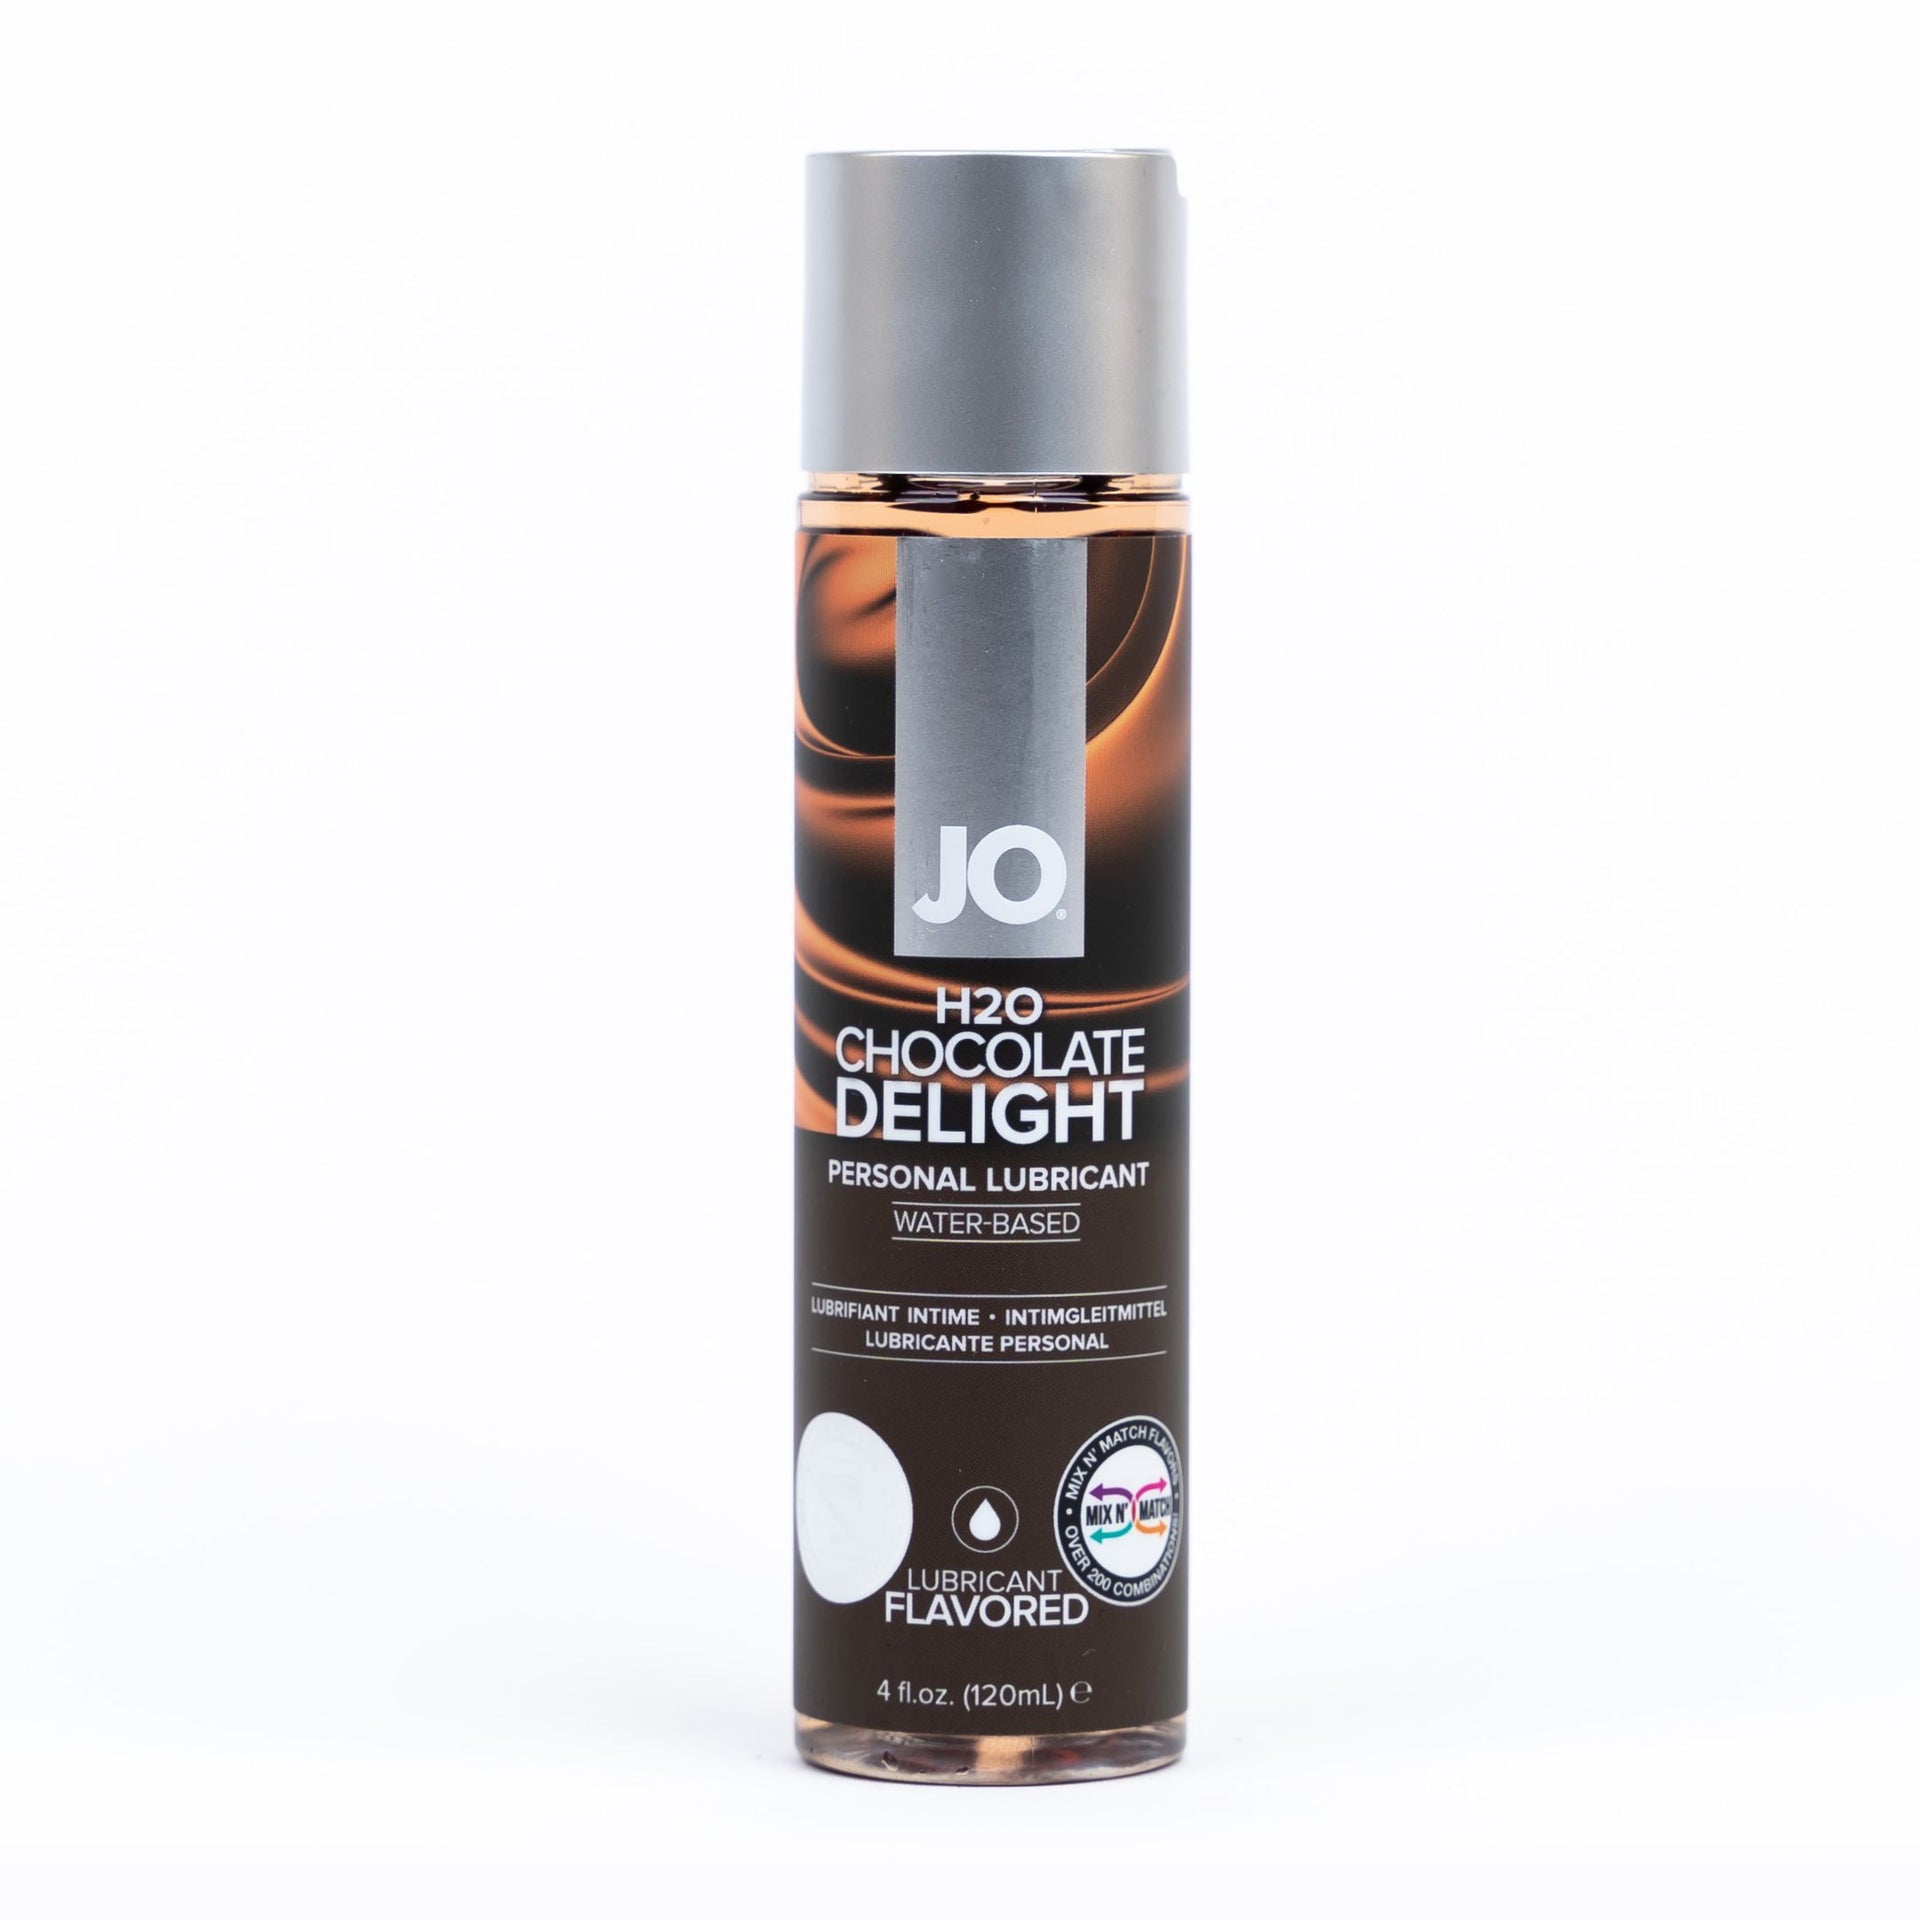 h20 chocolate delight lubricant front of pack